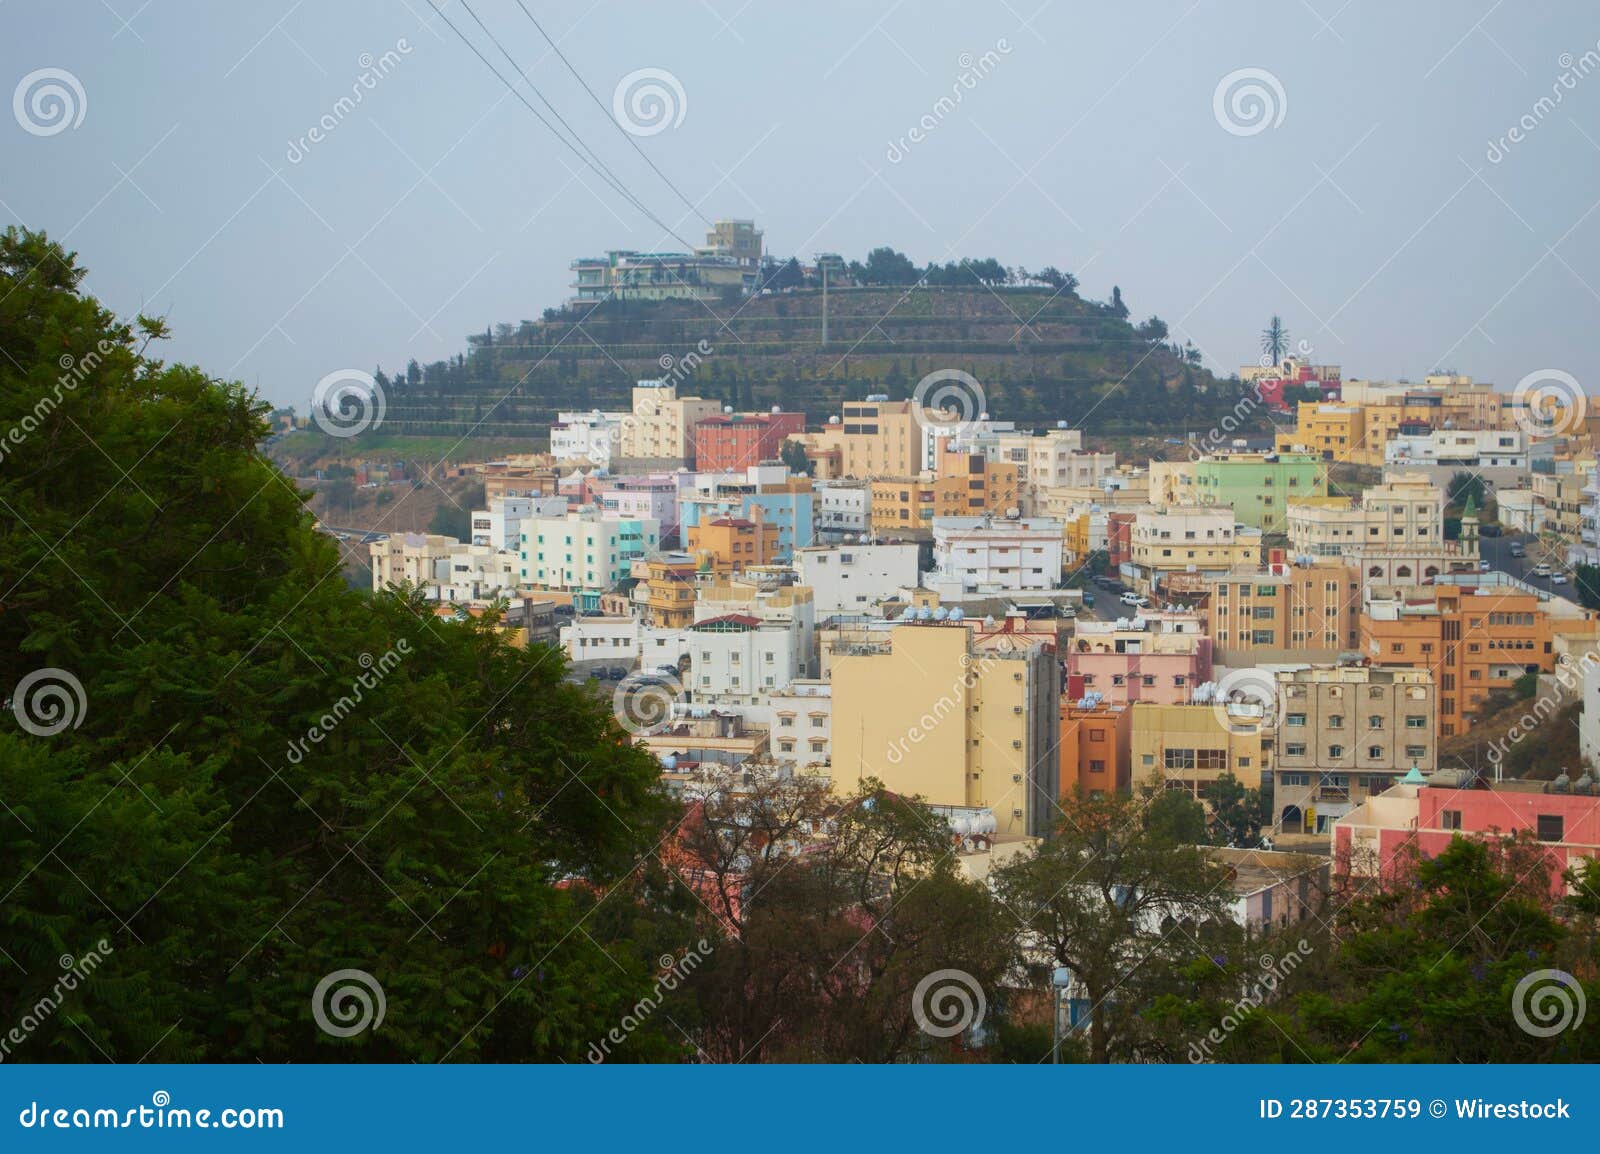 scenic view of a residential hillside seen from green mountain in abha, saudi arabia